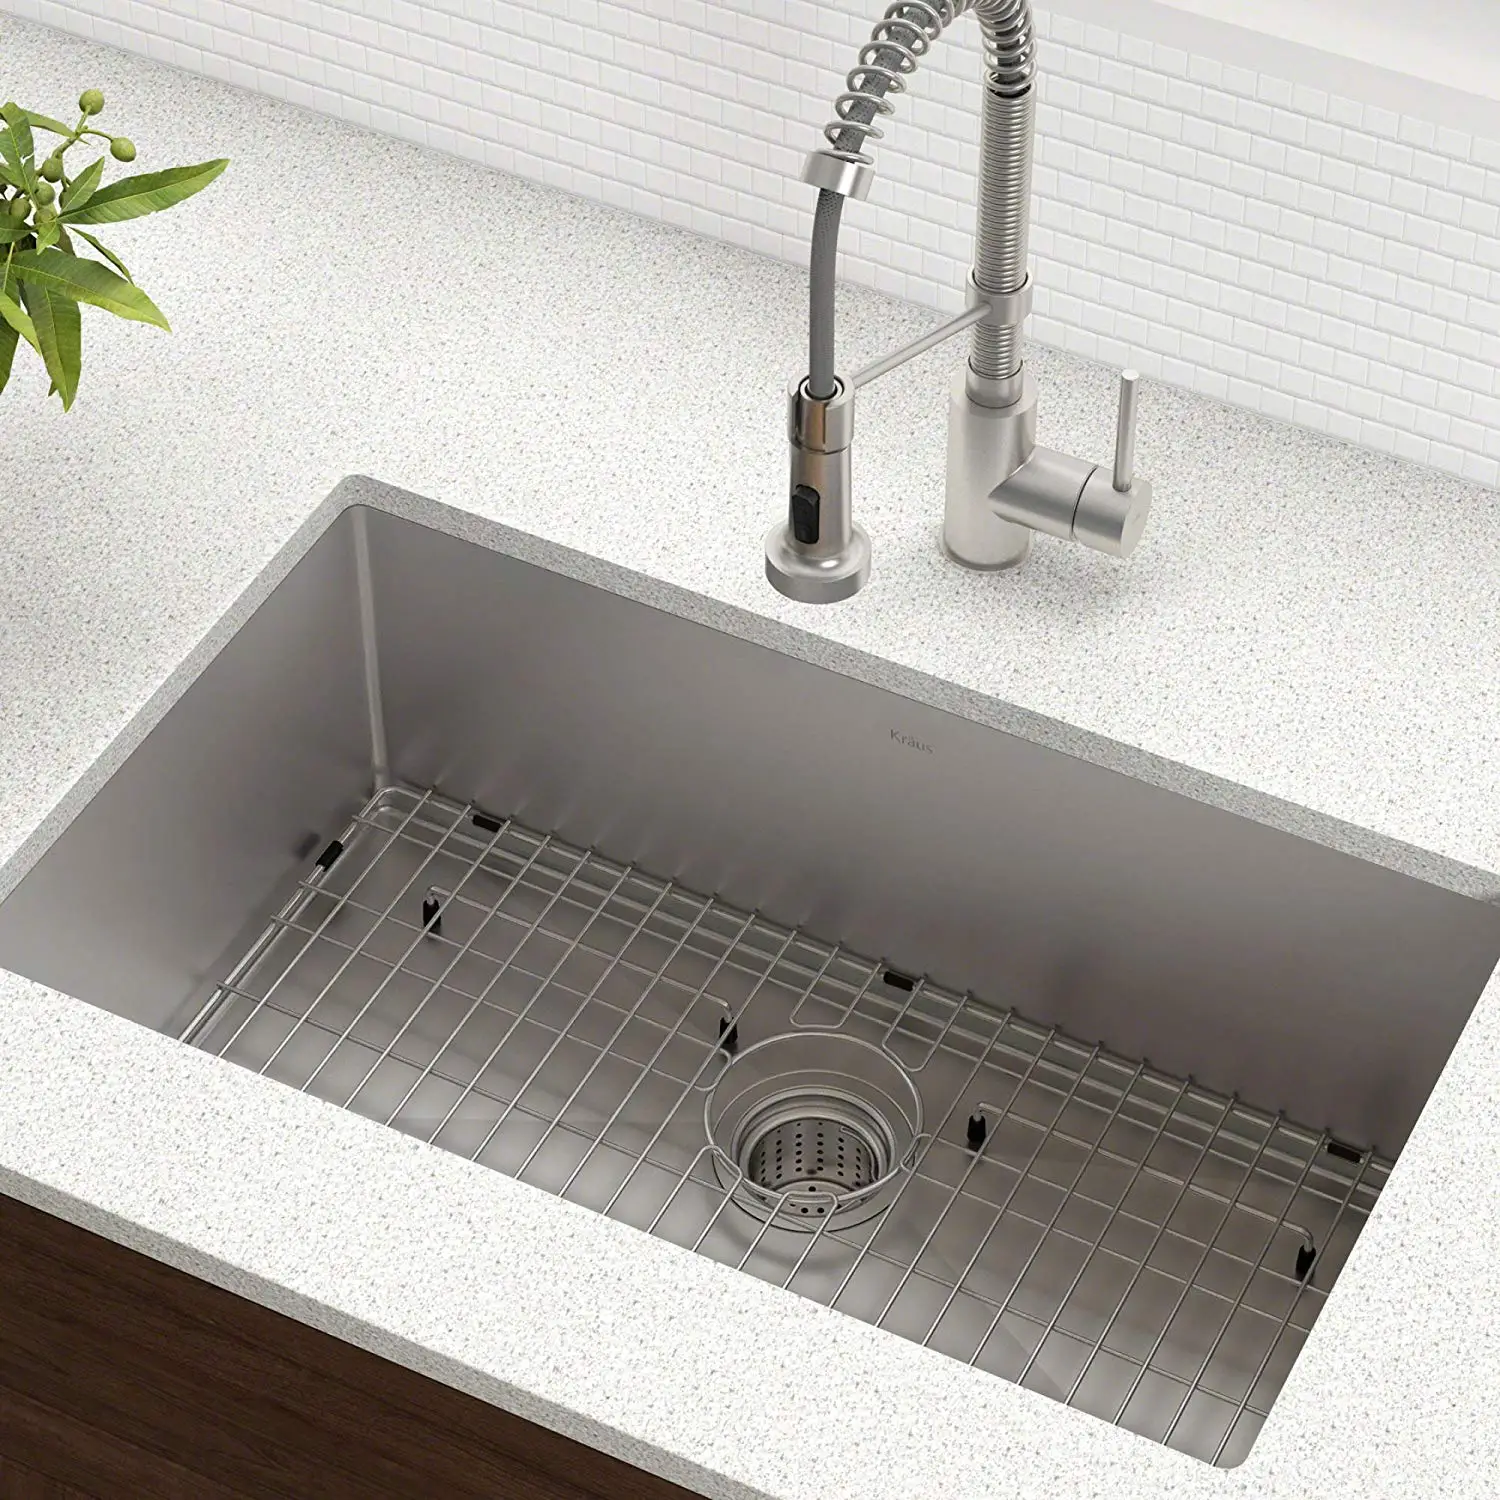 30 inch stainless steel sink